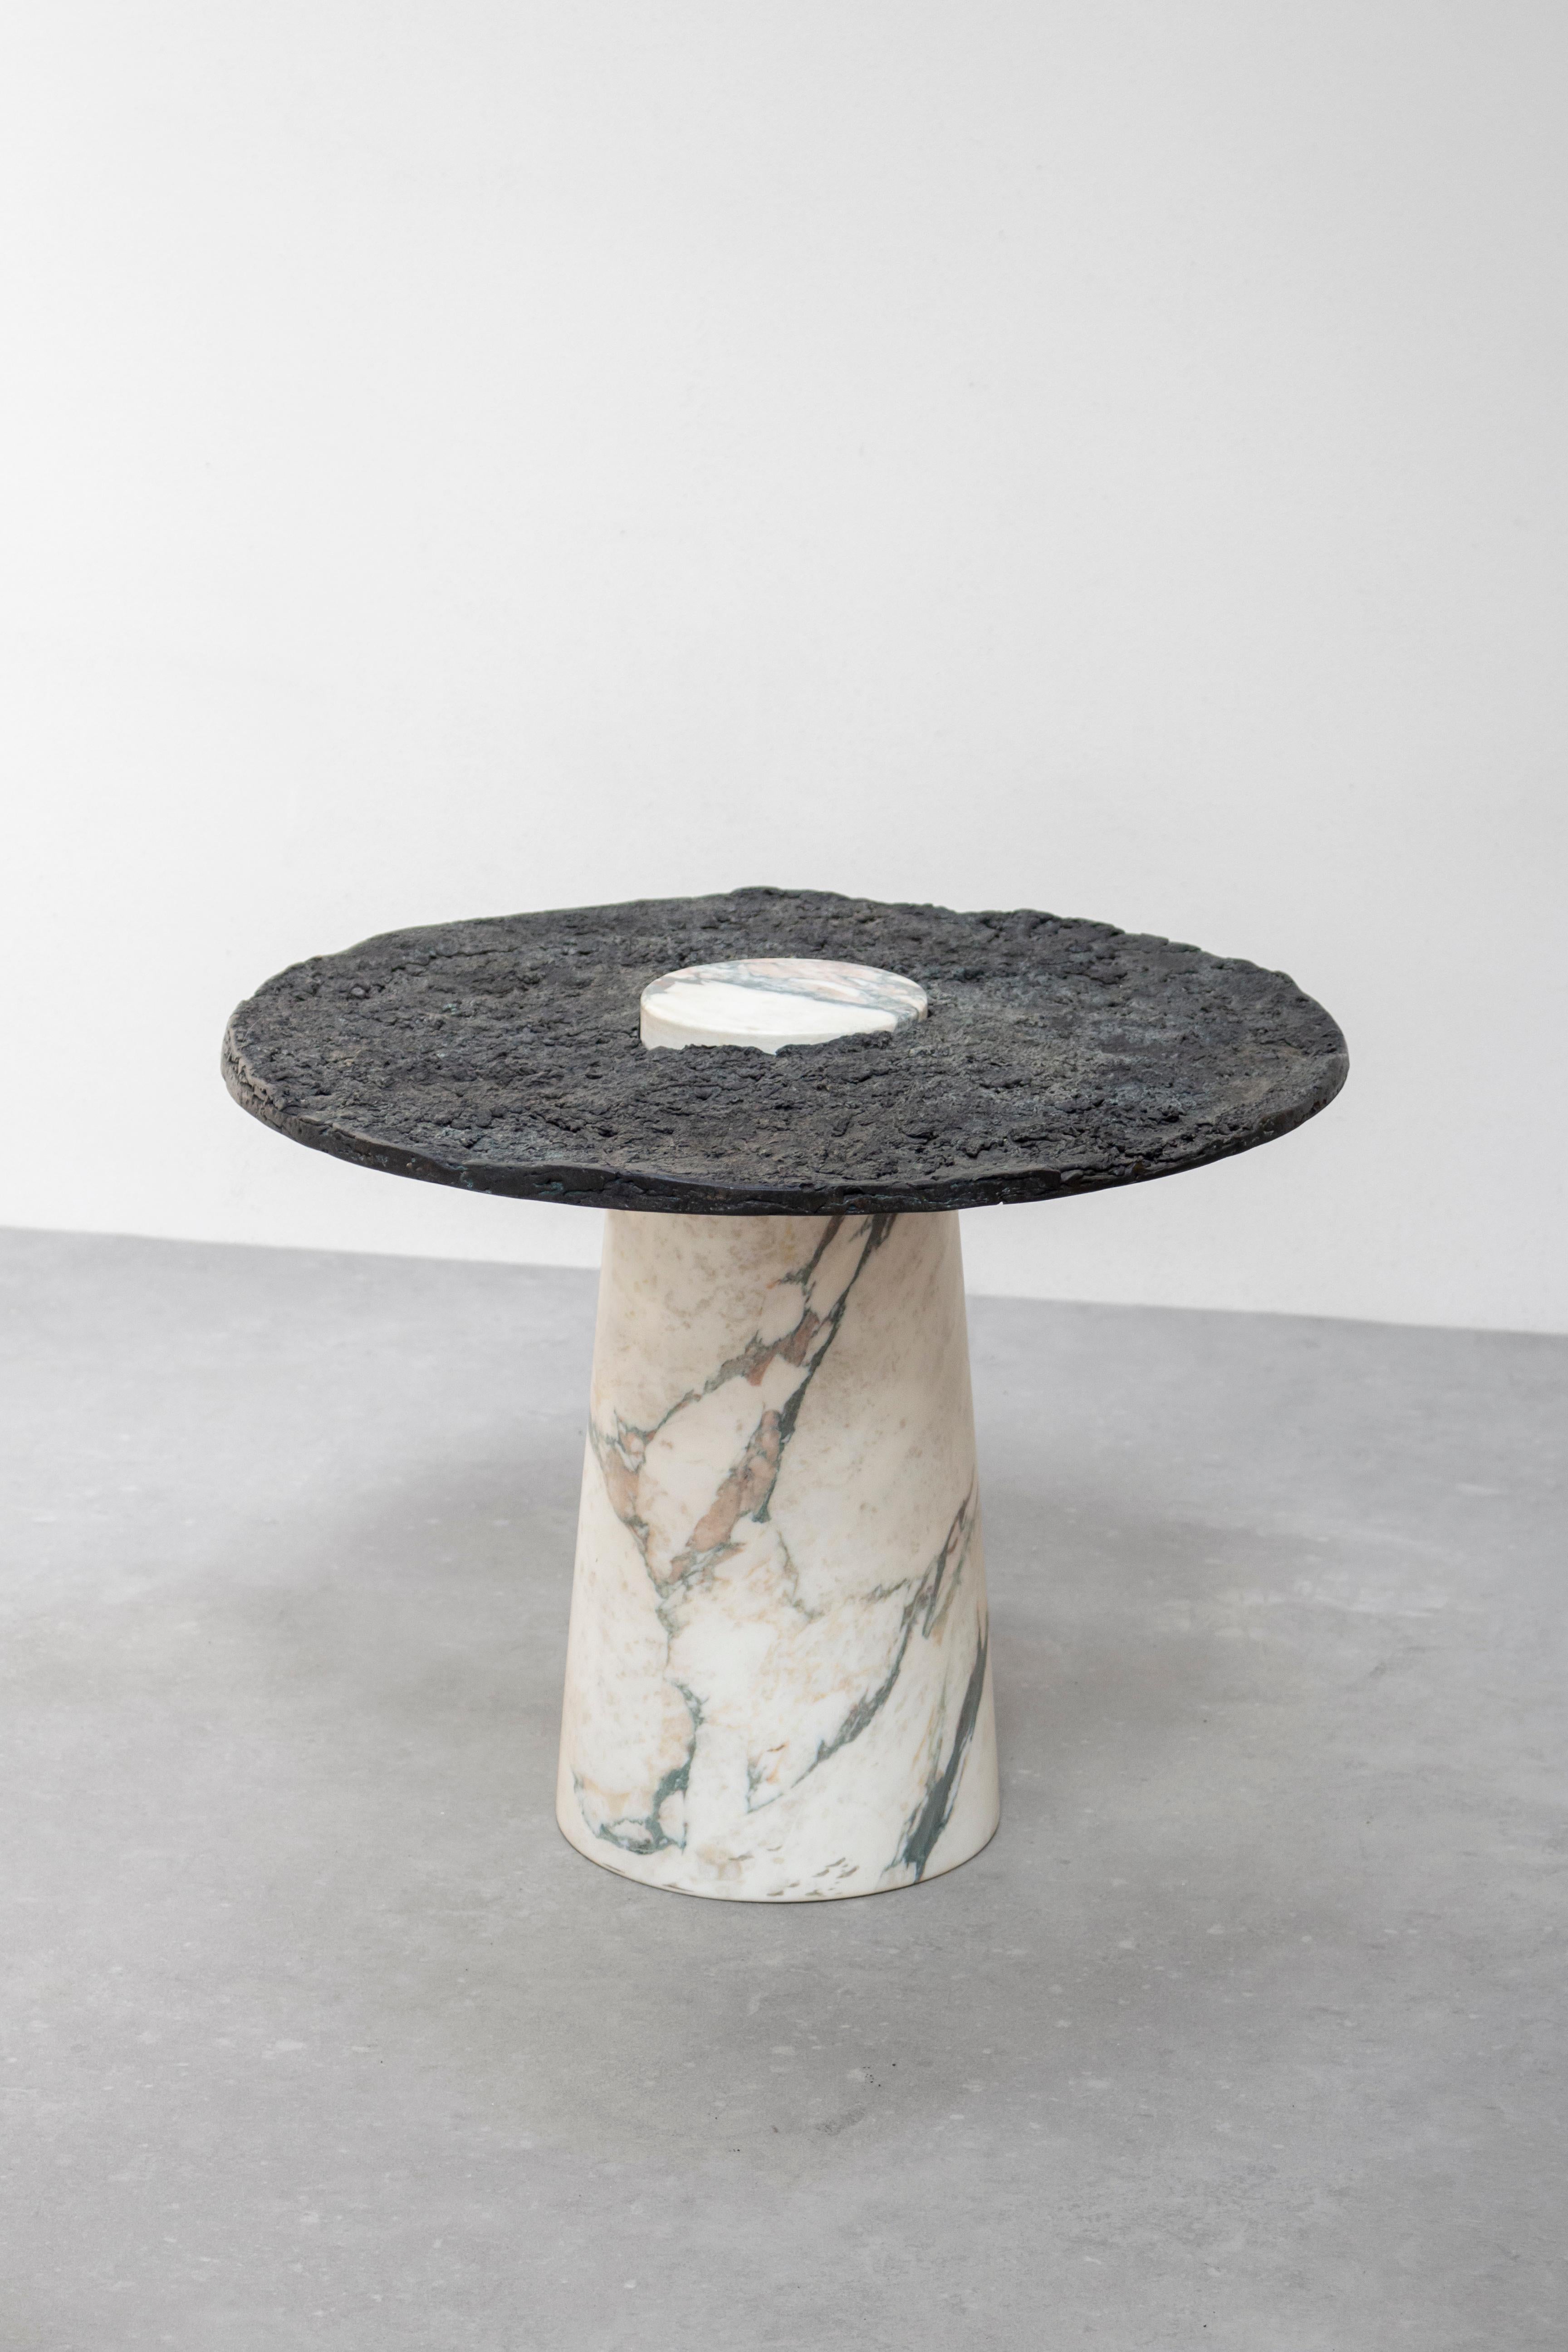 Marble side table by Tipstudio
Numbered Edition
Dimensions: Ø 50 x 45 cm
Materials: Calacatta Marble, Bronze Top
Weight: 50 kg 

Tipstudio, Imma Matera and Tommaso Lucarini, has chosen to focus on metals byproduct aims to enhancing them by